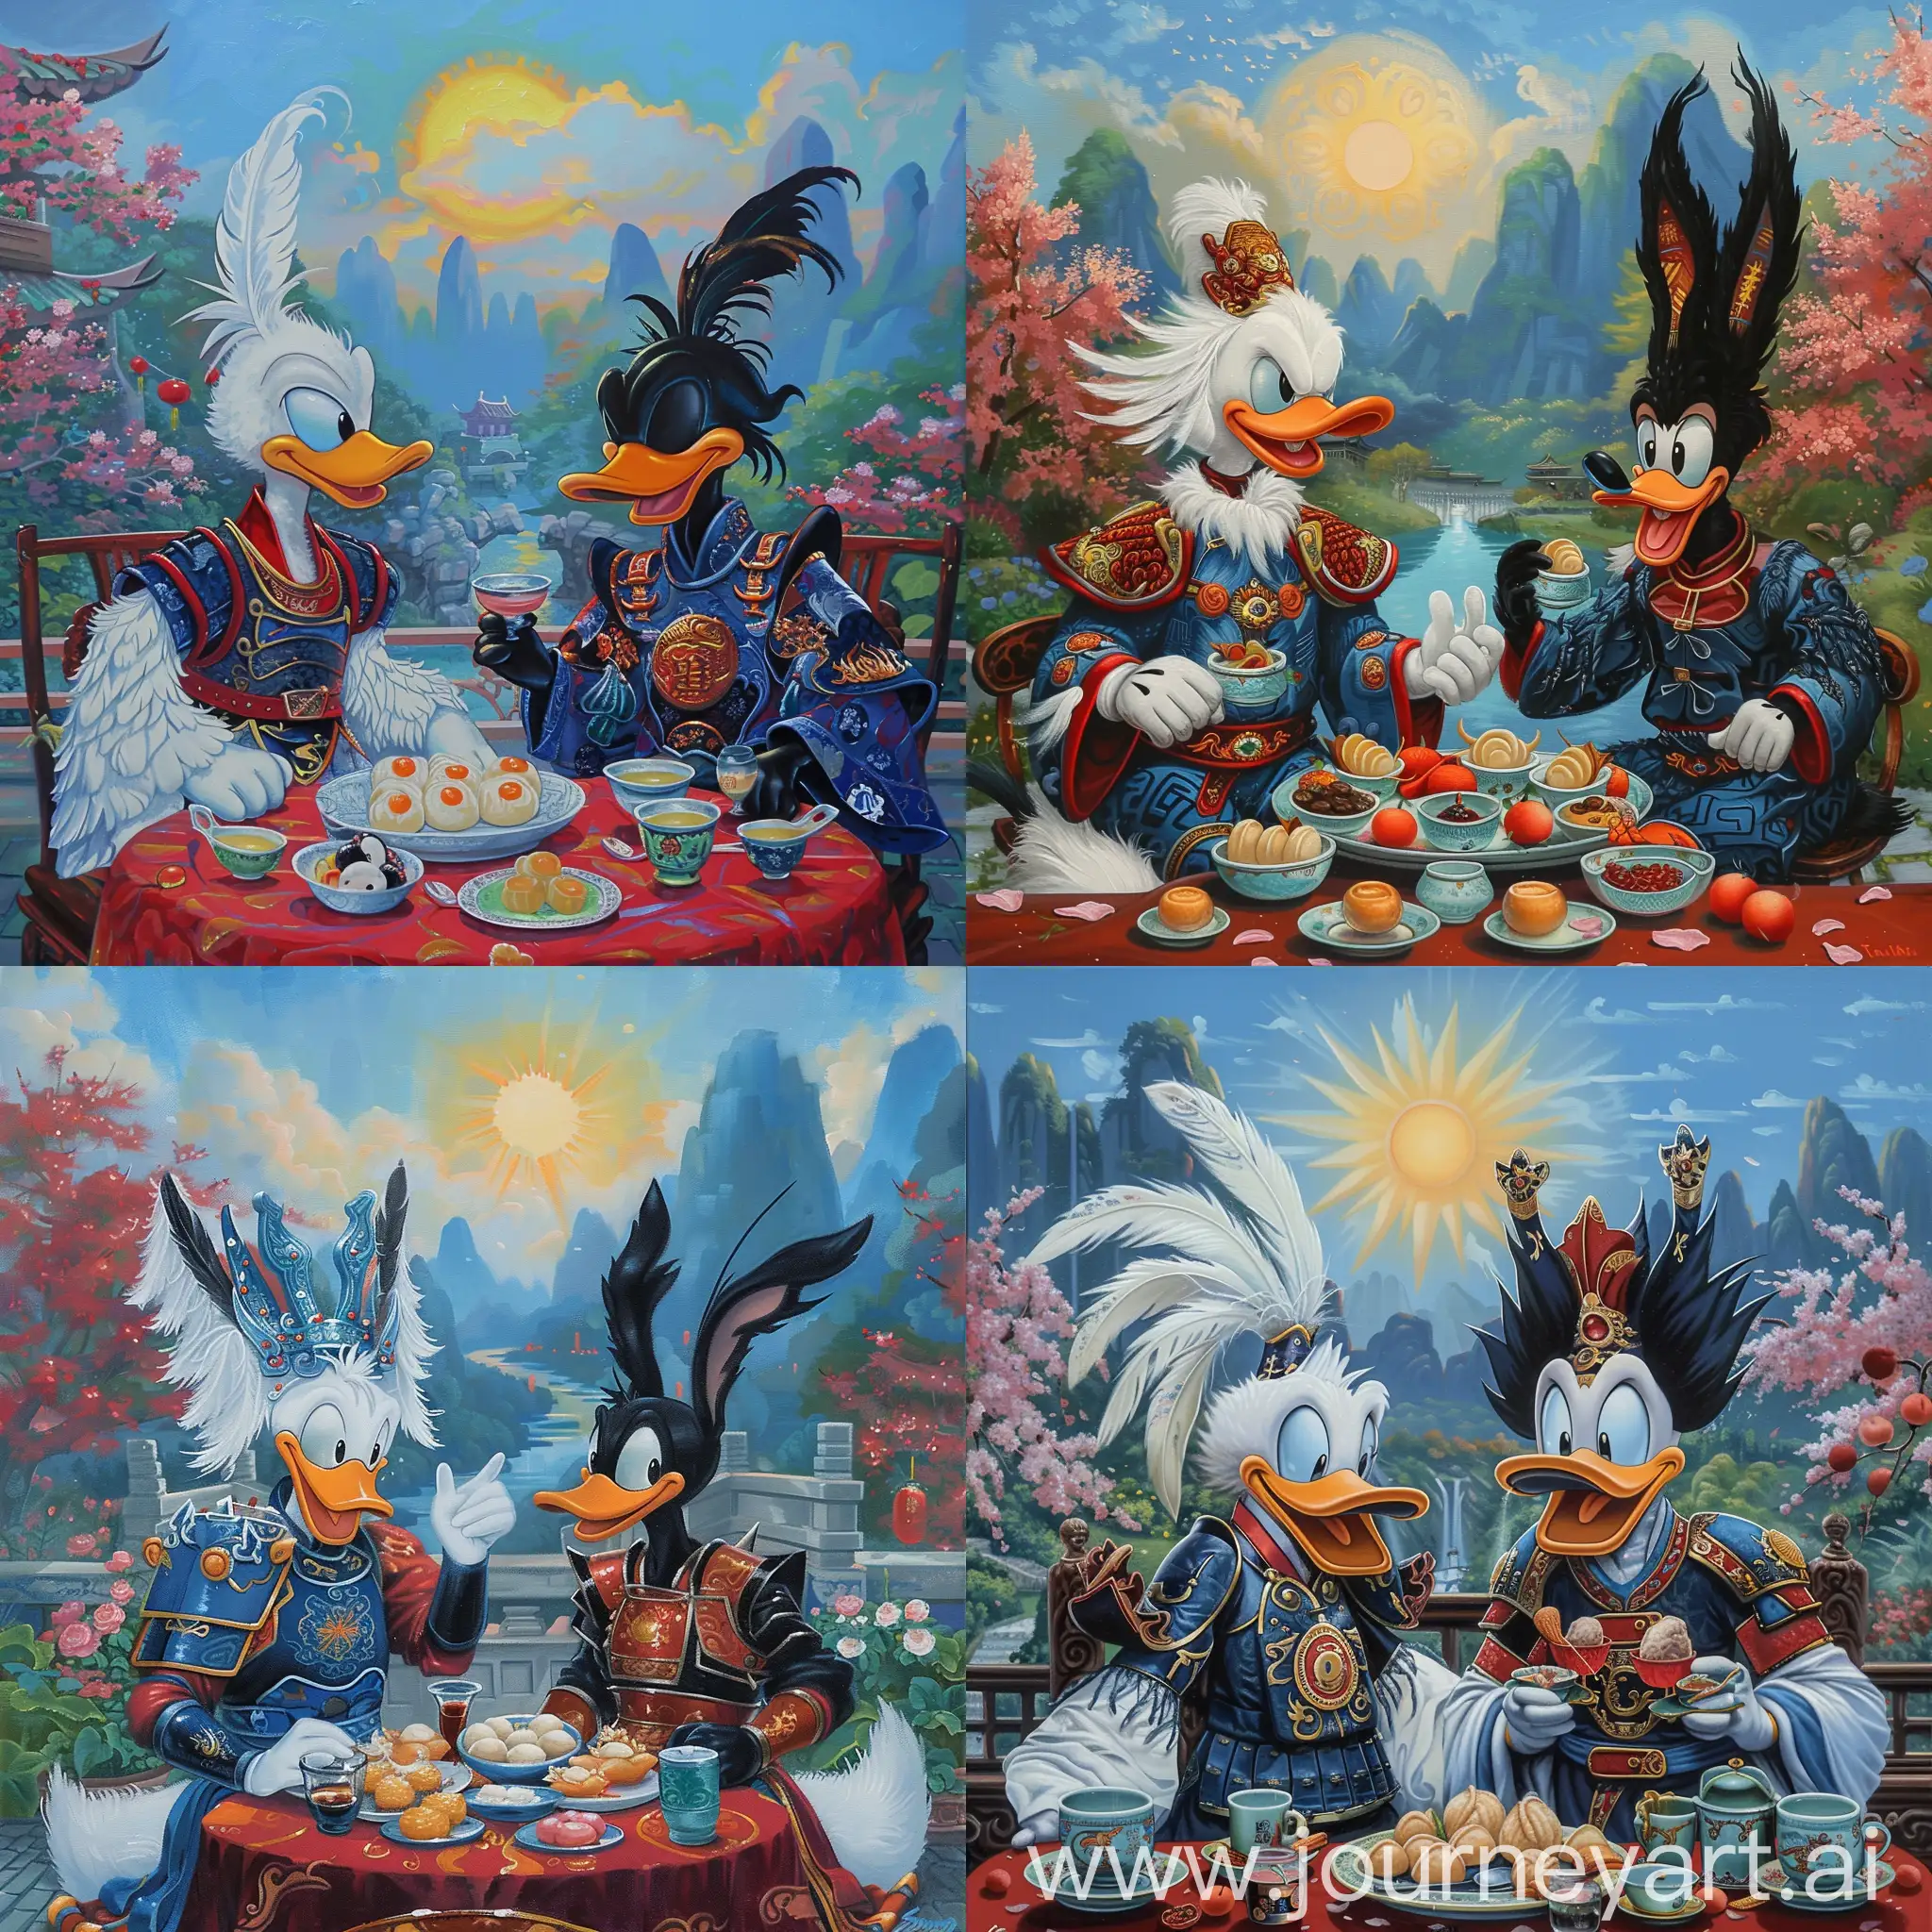 Donald-Duck-and-Daffy-Duck-Enjoy-Chinese-Dim-Sum-Feast-in-Summer-Palace-Garden